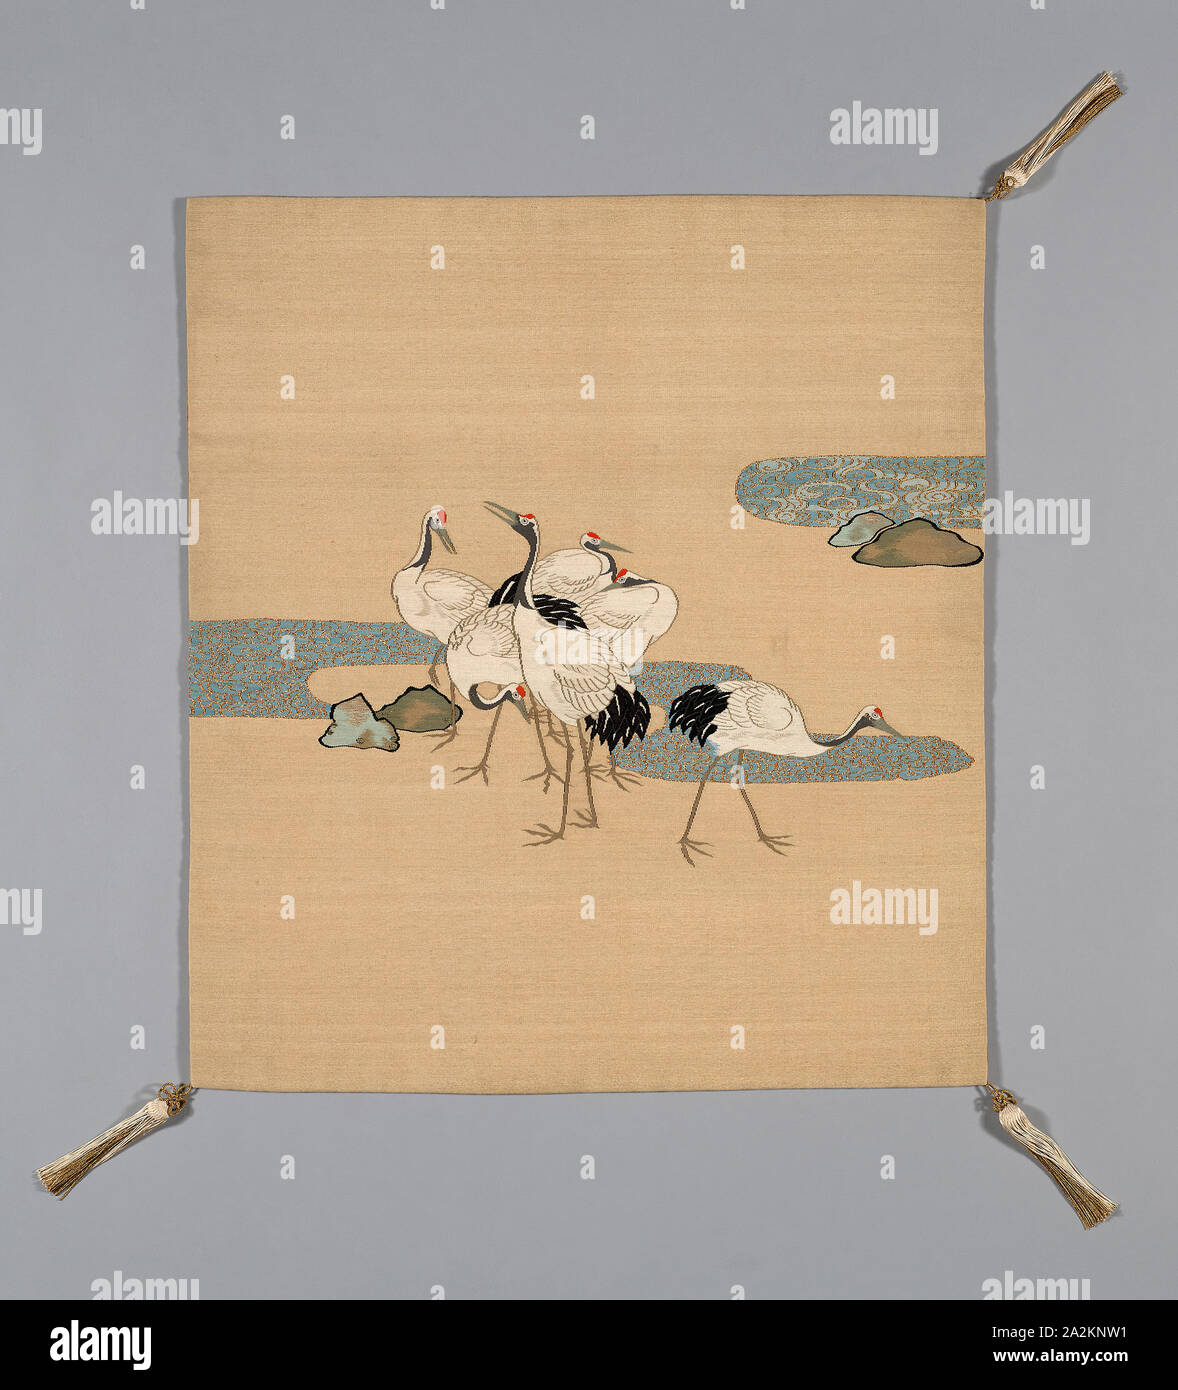 Fukusa (Gift Cover), late Edo period (1789–1868)/ Meiji period (1868–1912), 19th century, Japan, Mon side: silk, warp-faced, weft ribbed plain weave (shioze), dye extracted through stenciled chemical dye stripper (bassen), patterned side: cotton, silk and gold-leaf-over-lacquered-paper strip wrapped silk, slit tapestry weave with wrapped outlining wefts (tsuzure), paper interlining, Sewn with front and lining matched in size (Tachikiri awase), corners: silk, gold-leaf-over-lacquered-paper strip wrapped silk, tubular 1:1 oblique interlacing over cotton core, knotted, silk-wrapped cotton ball Stock Photo